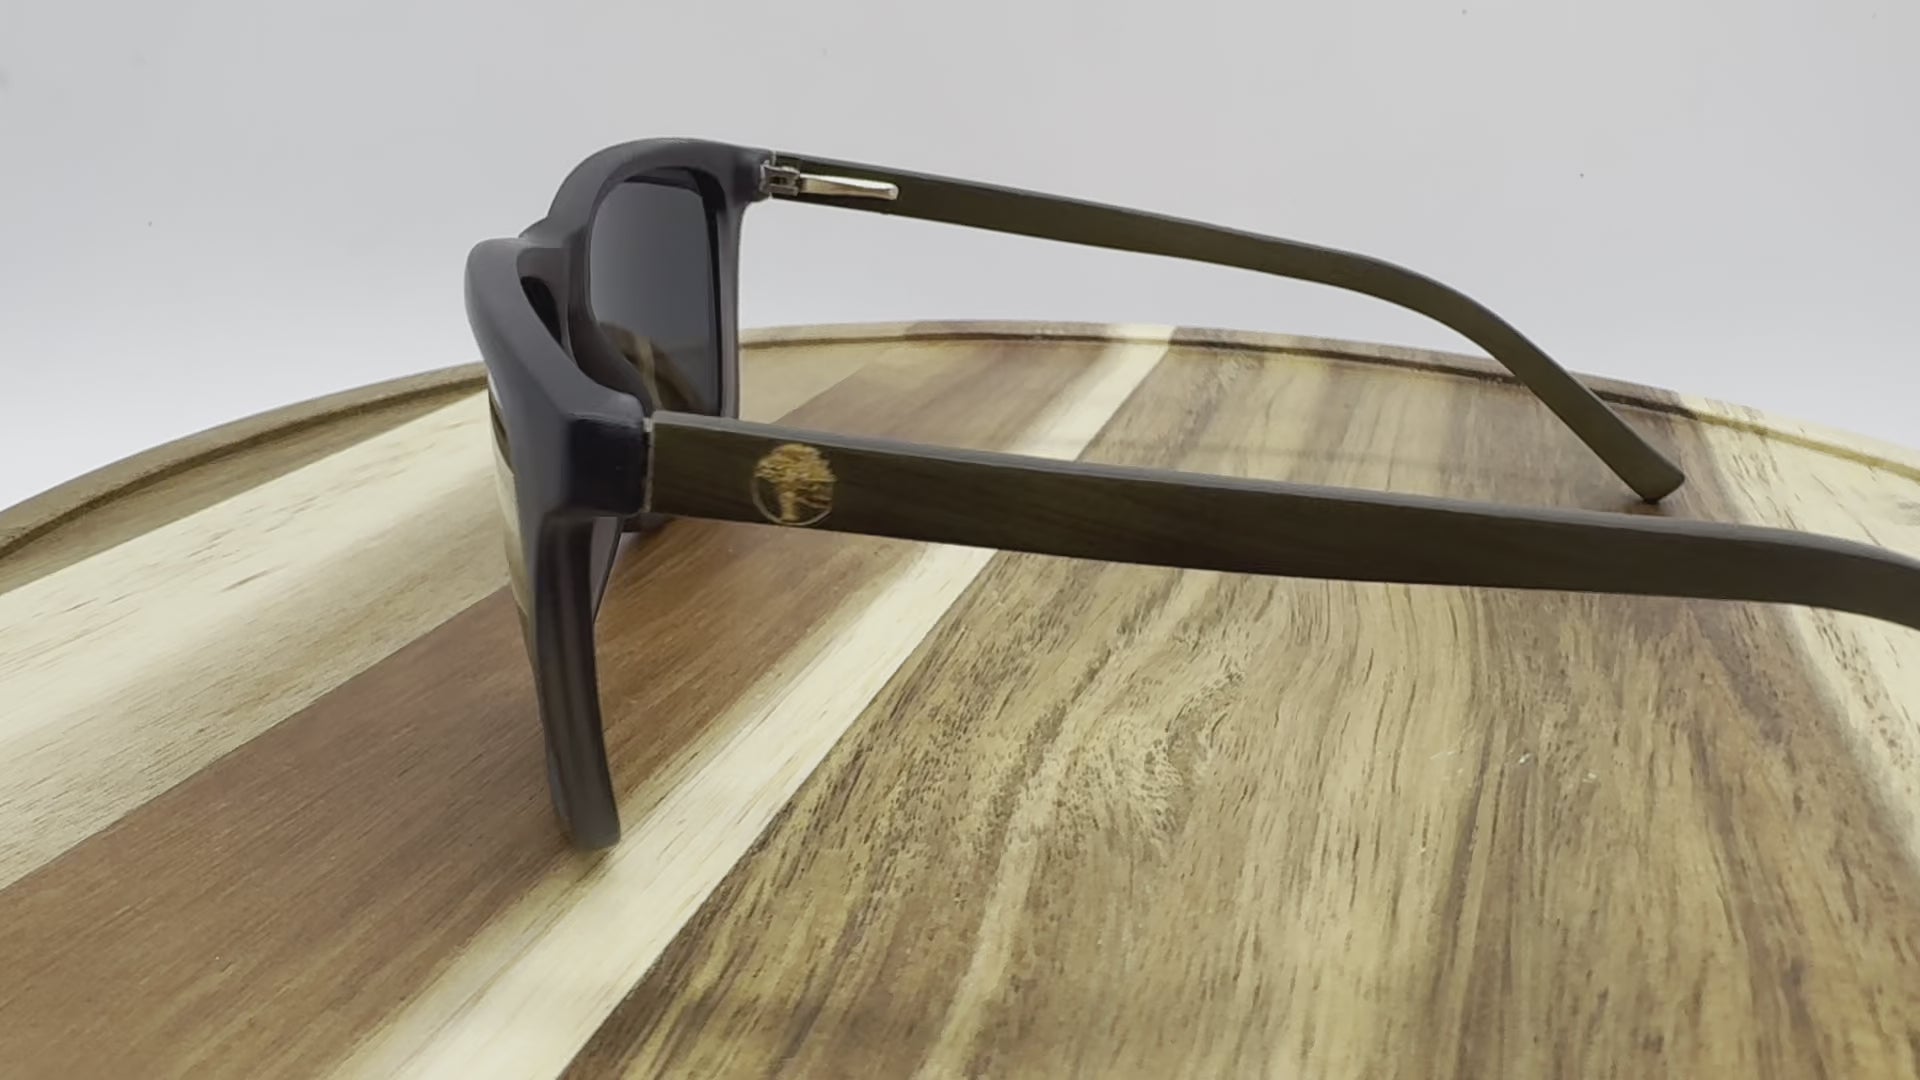 Handmade Wooden Sunglasses - Classic Thin Wooden Arms with Stylish Plastic Frame